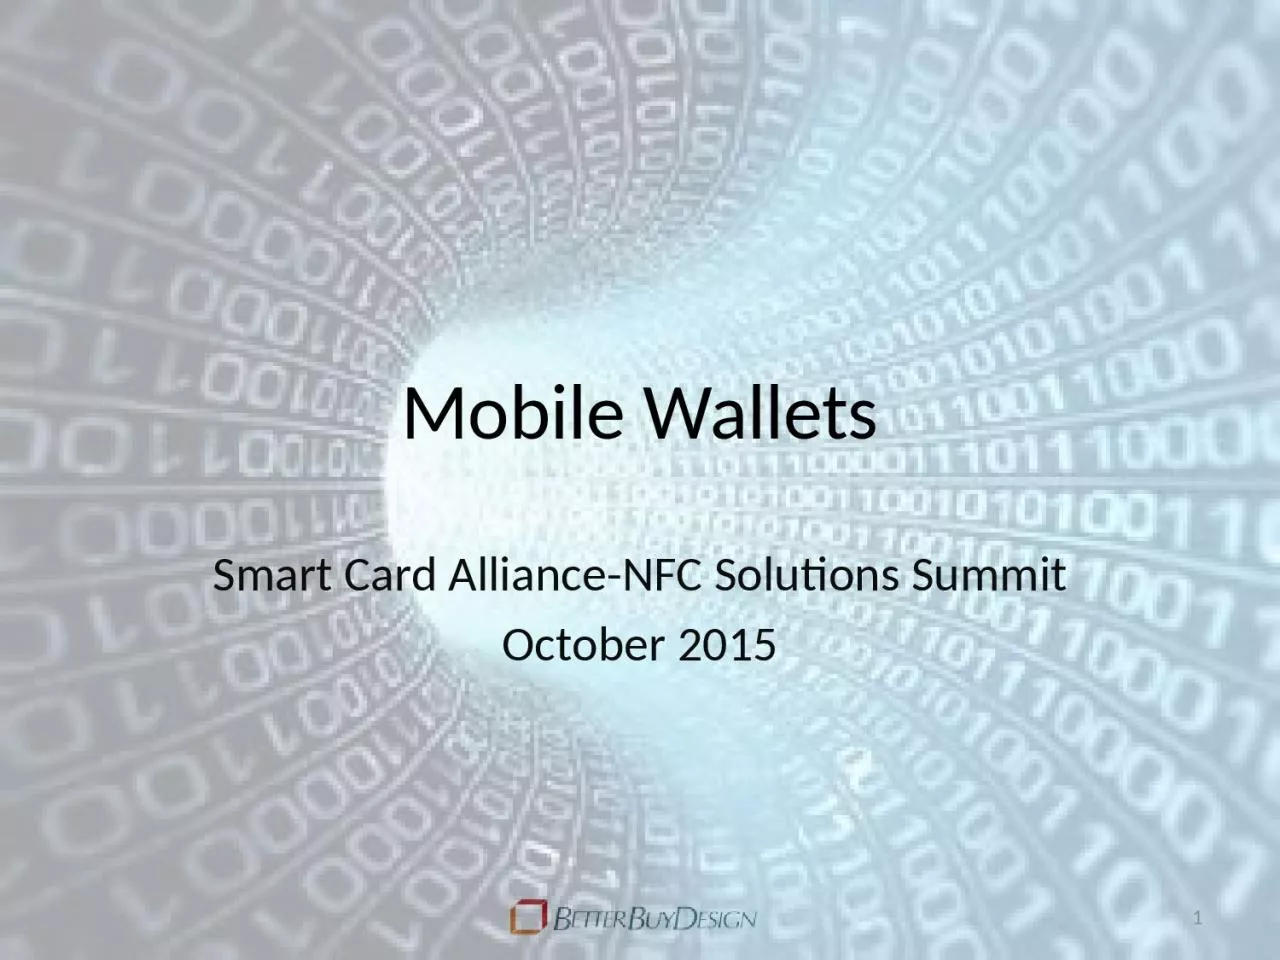 Mobile Wallets Smart Card Alliance-NFC Solutions Summit